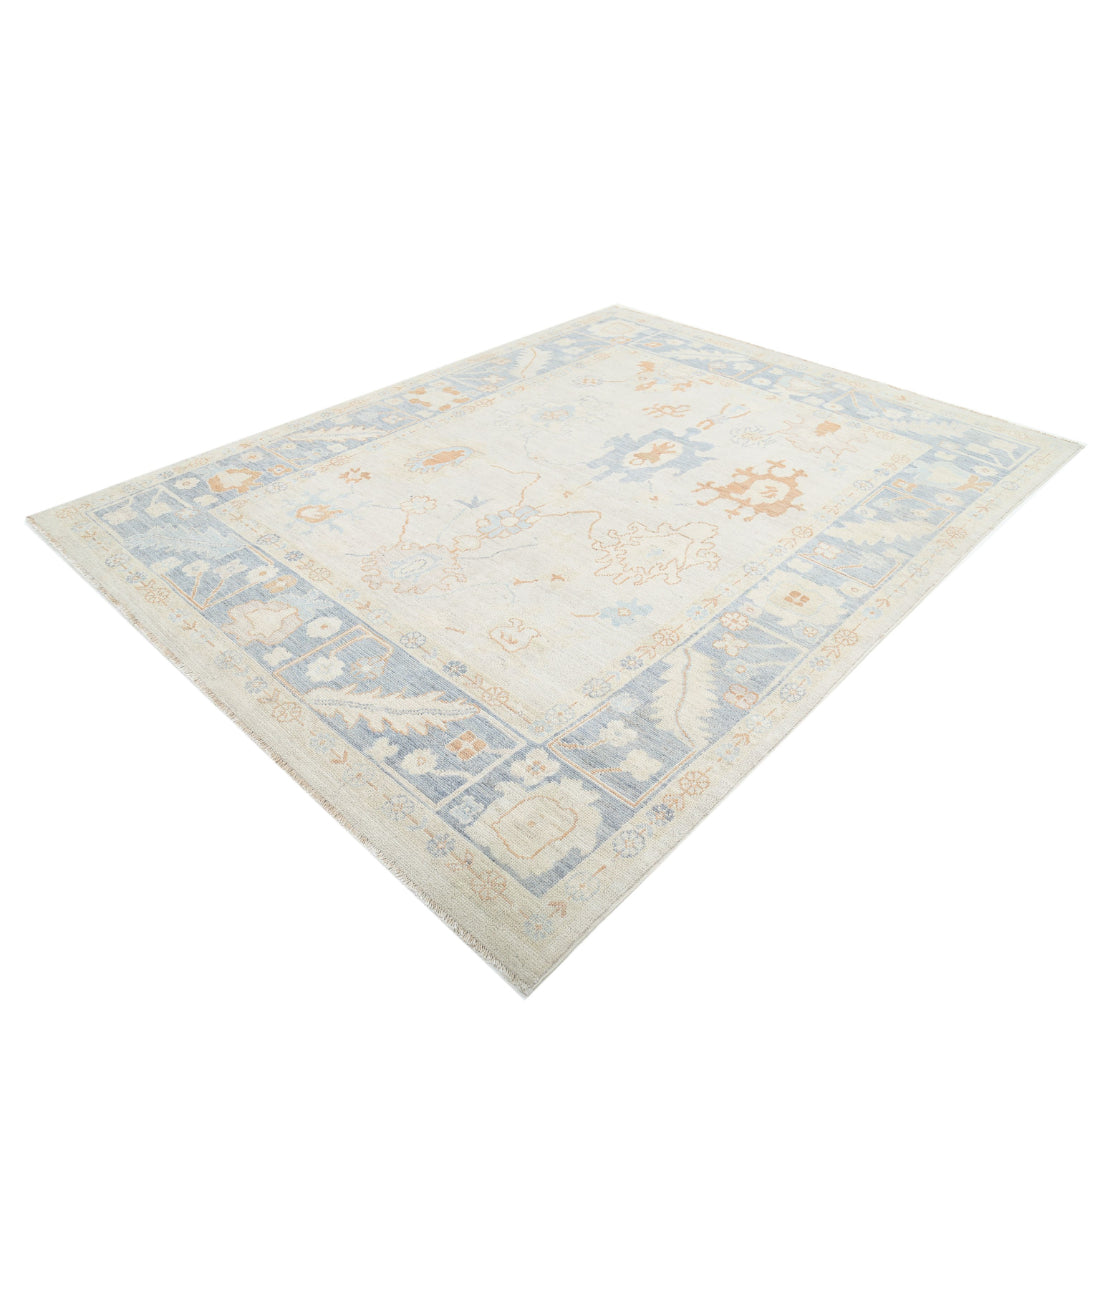 Hand Knotted Oushak Wool Rug - 7'10'' x 10'0'' 7'10'' x 10'0'' (235 X 300) / Ivory / Grey